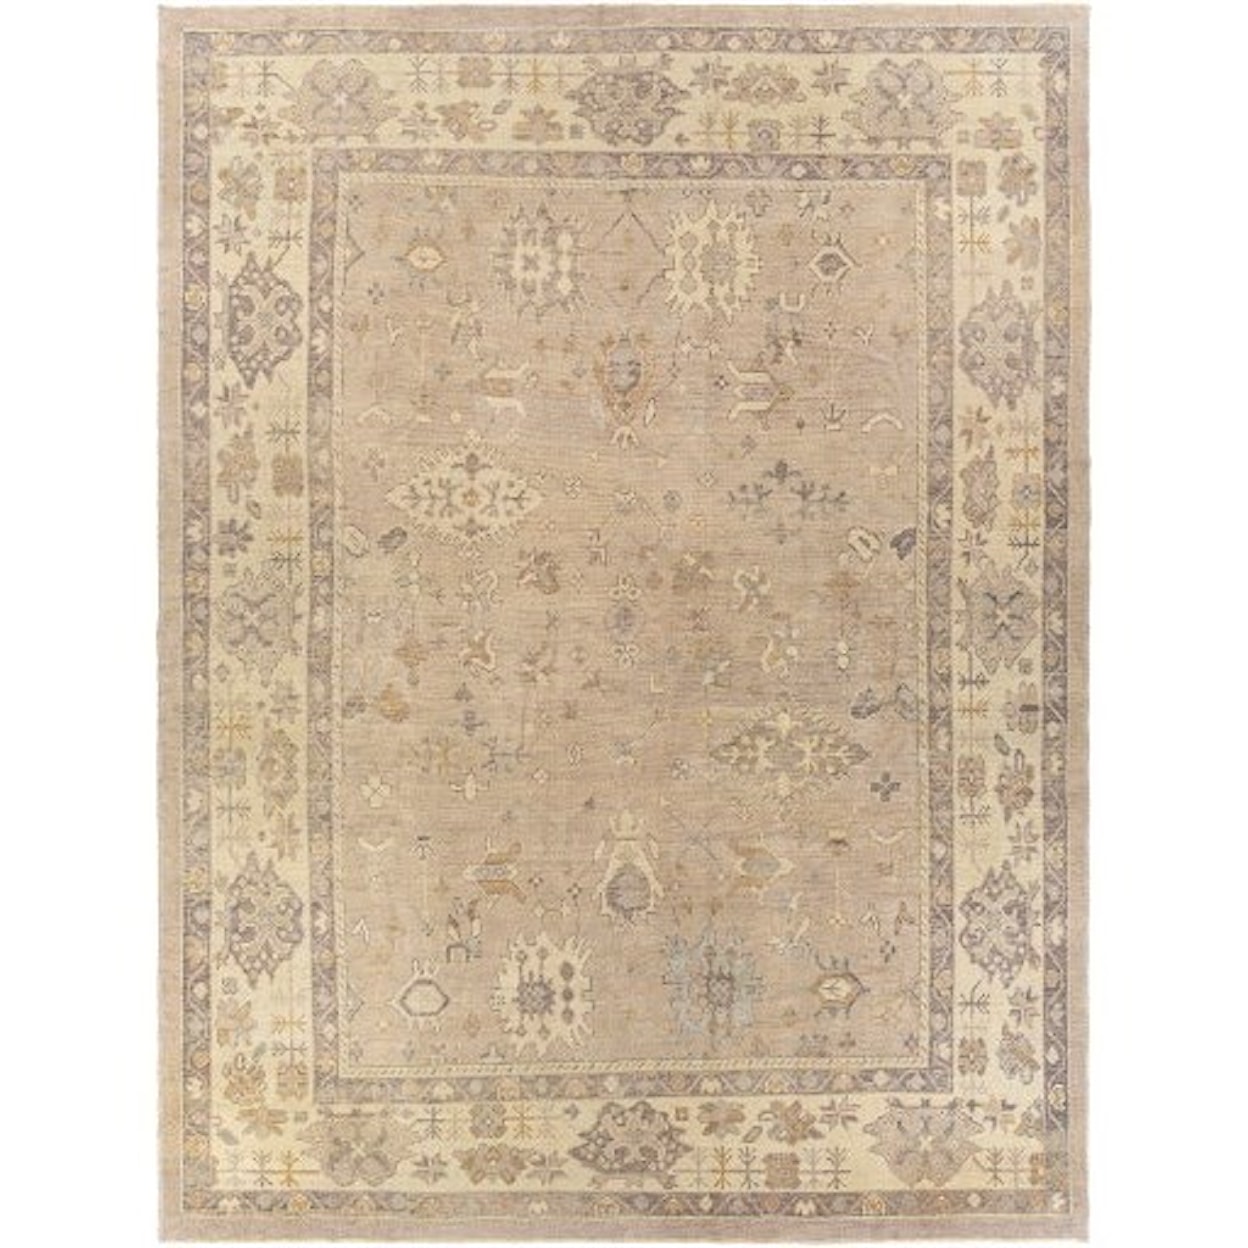 Ruby-Gordon Accents One of a Kind 10'8" x 14'3" Rug